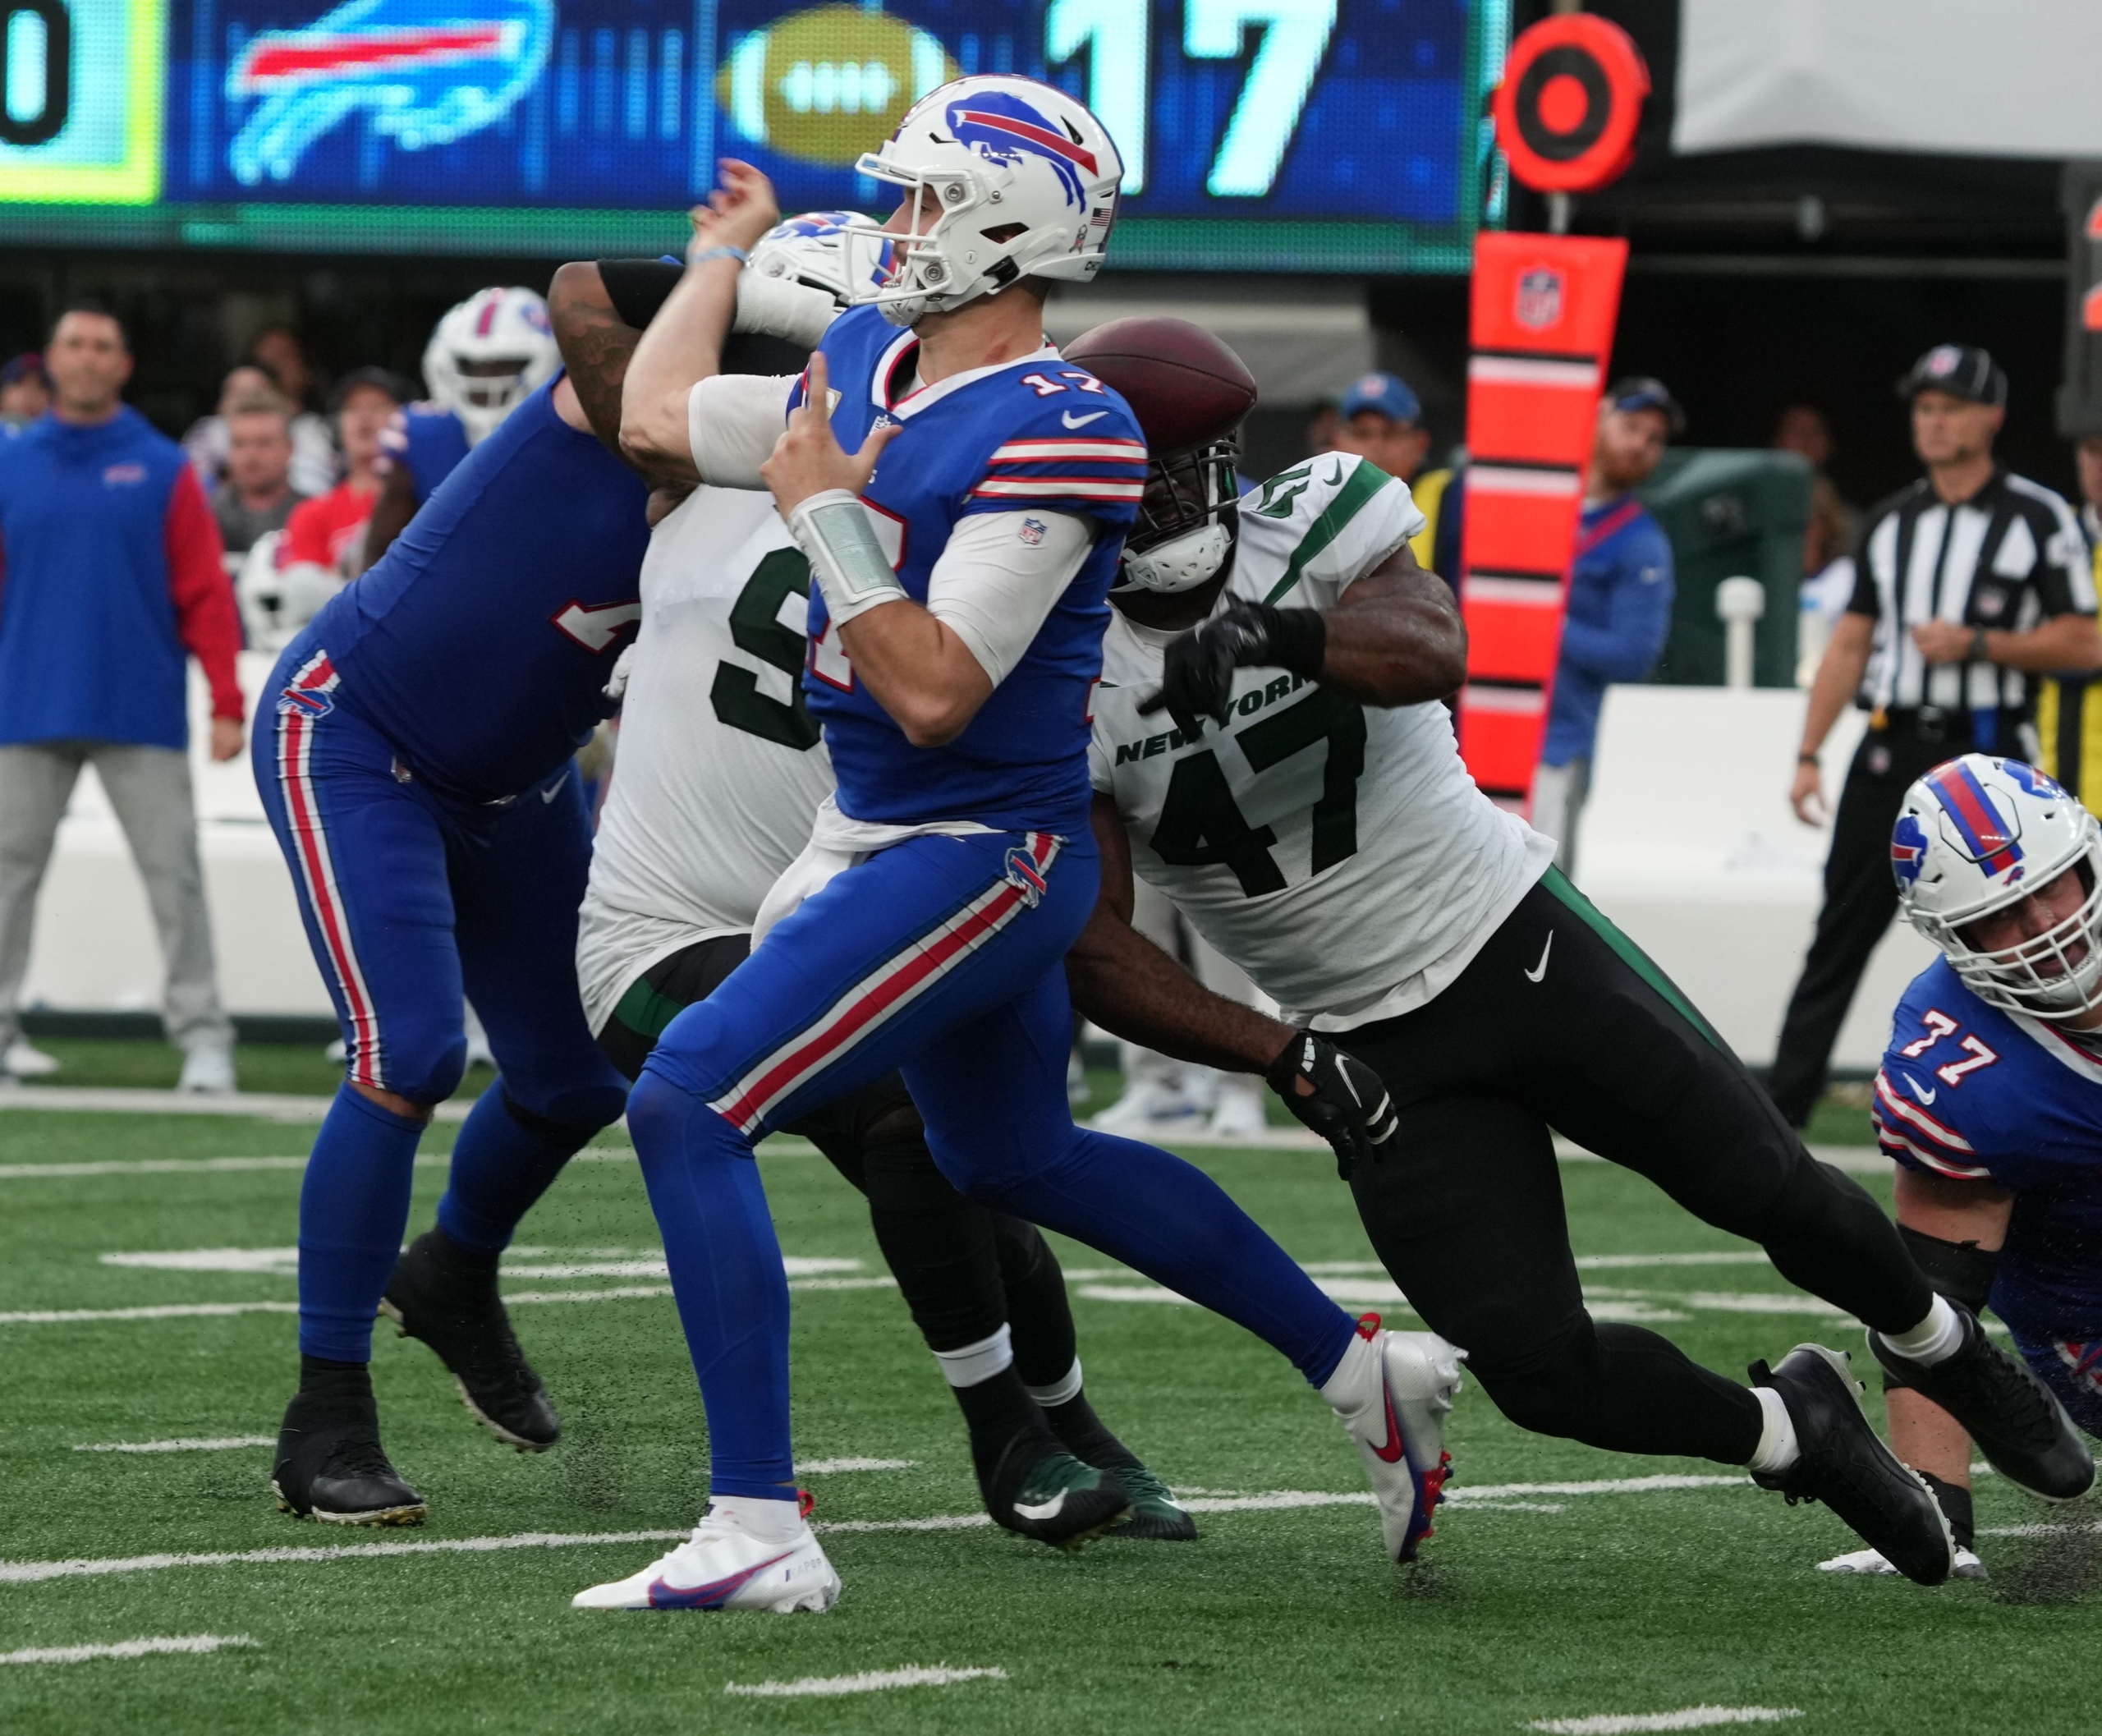 Buffalo Bills QB Josh Allen dealing with elbow injury, status for Week 10 up in the air